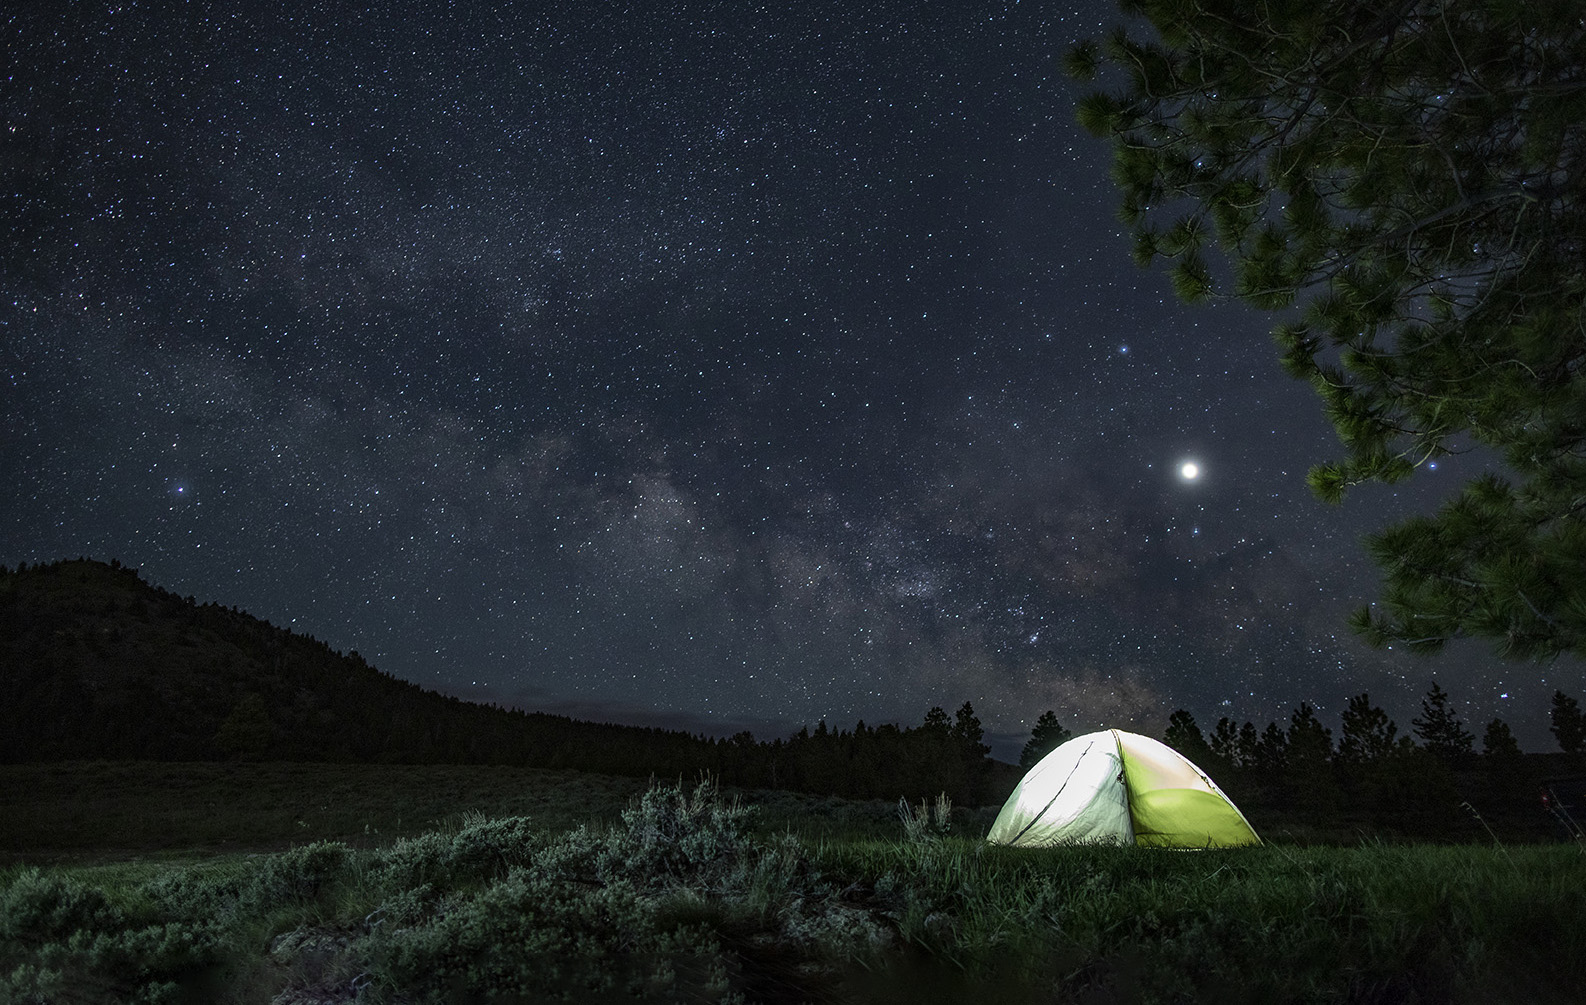 Bryce Canyon Country — A glowing dome tent under a starry sky.